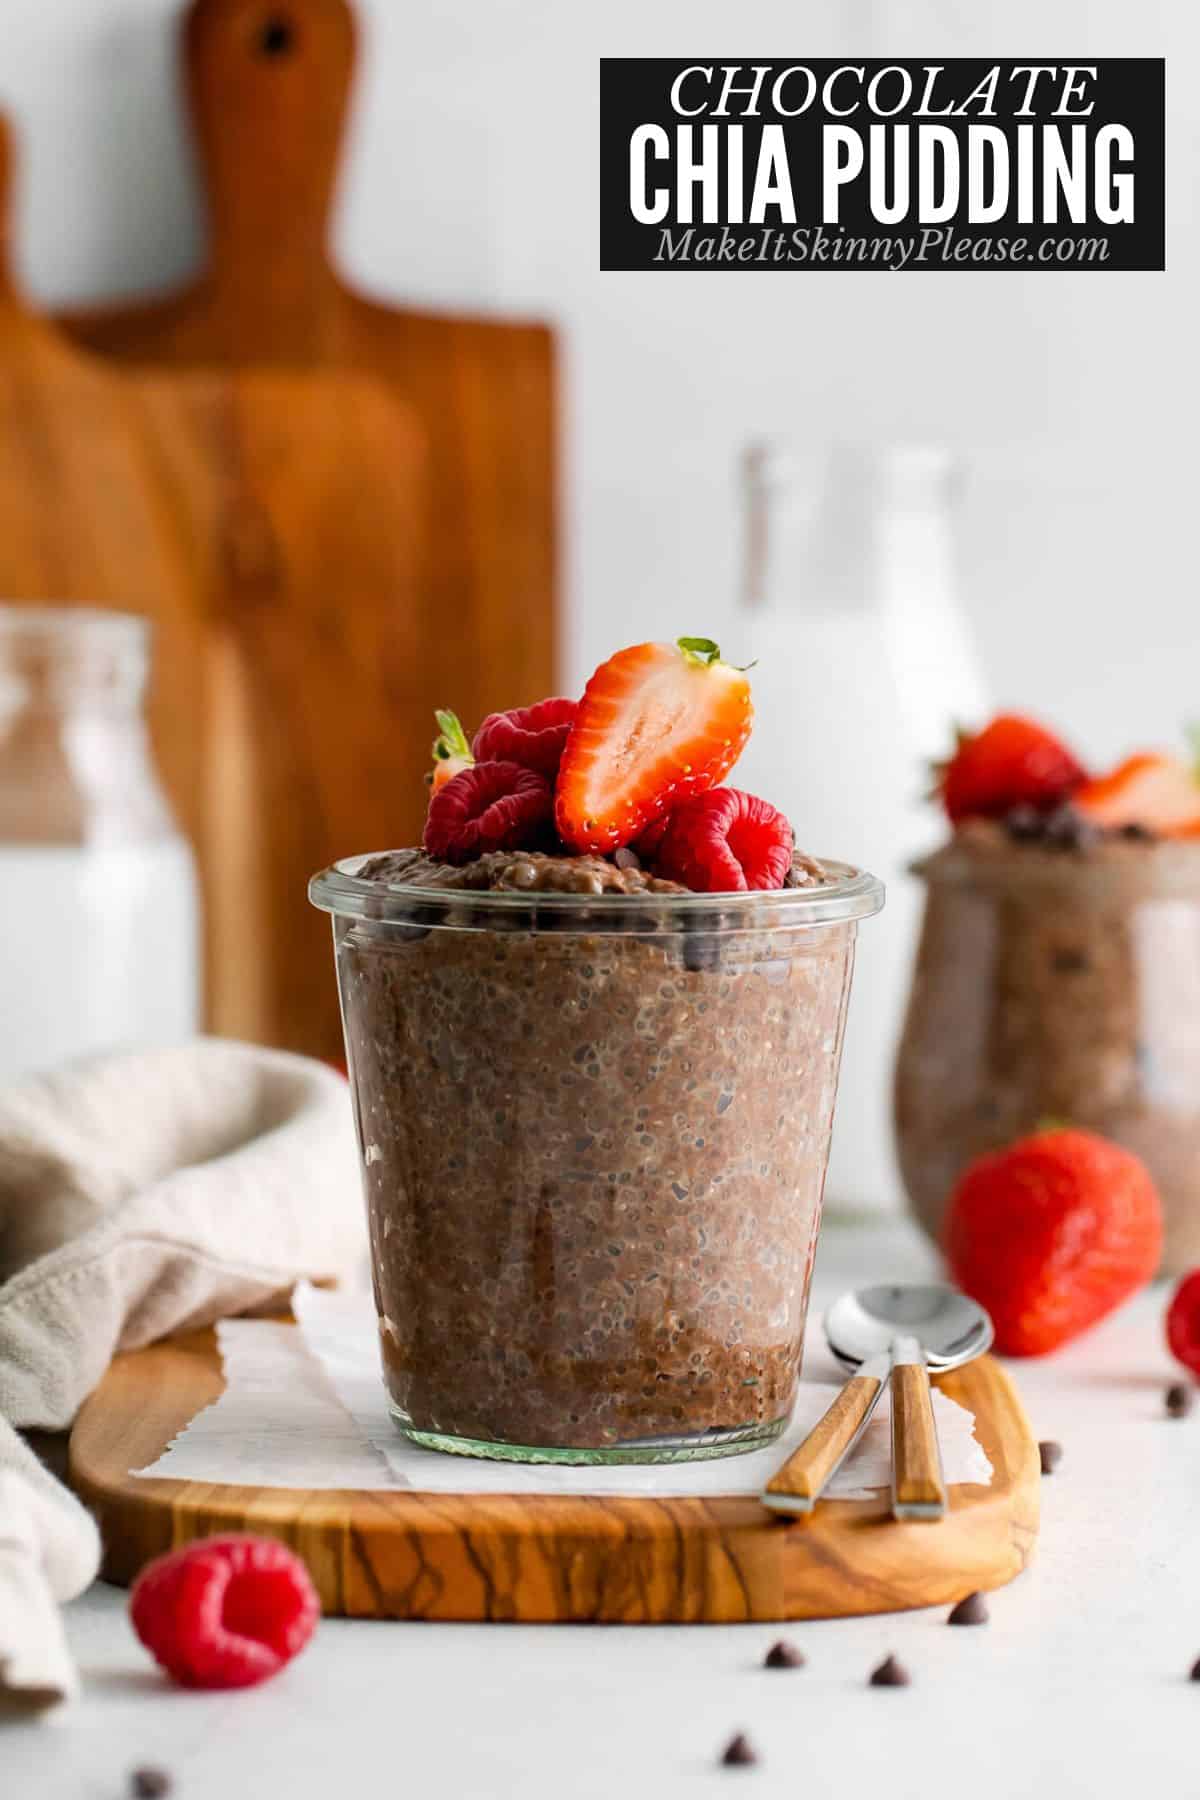 chocolate chia pudding with berry toppings.